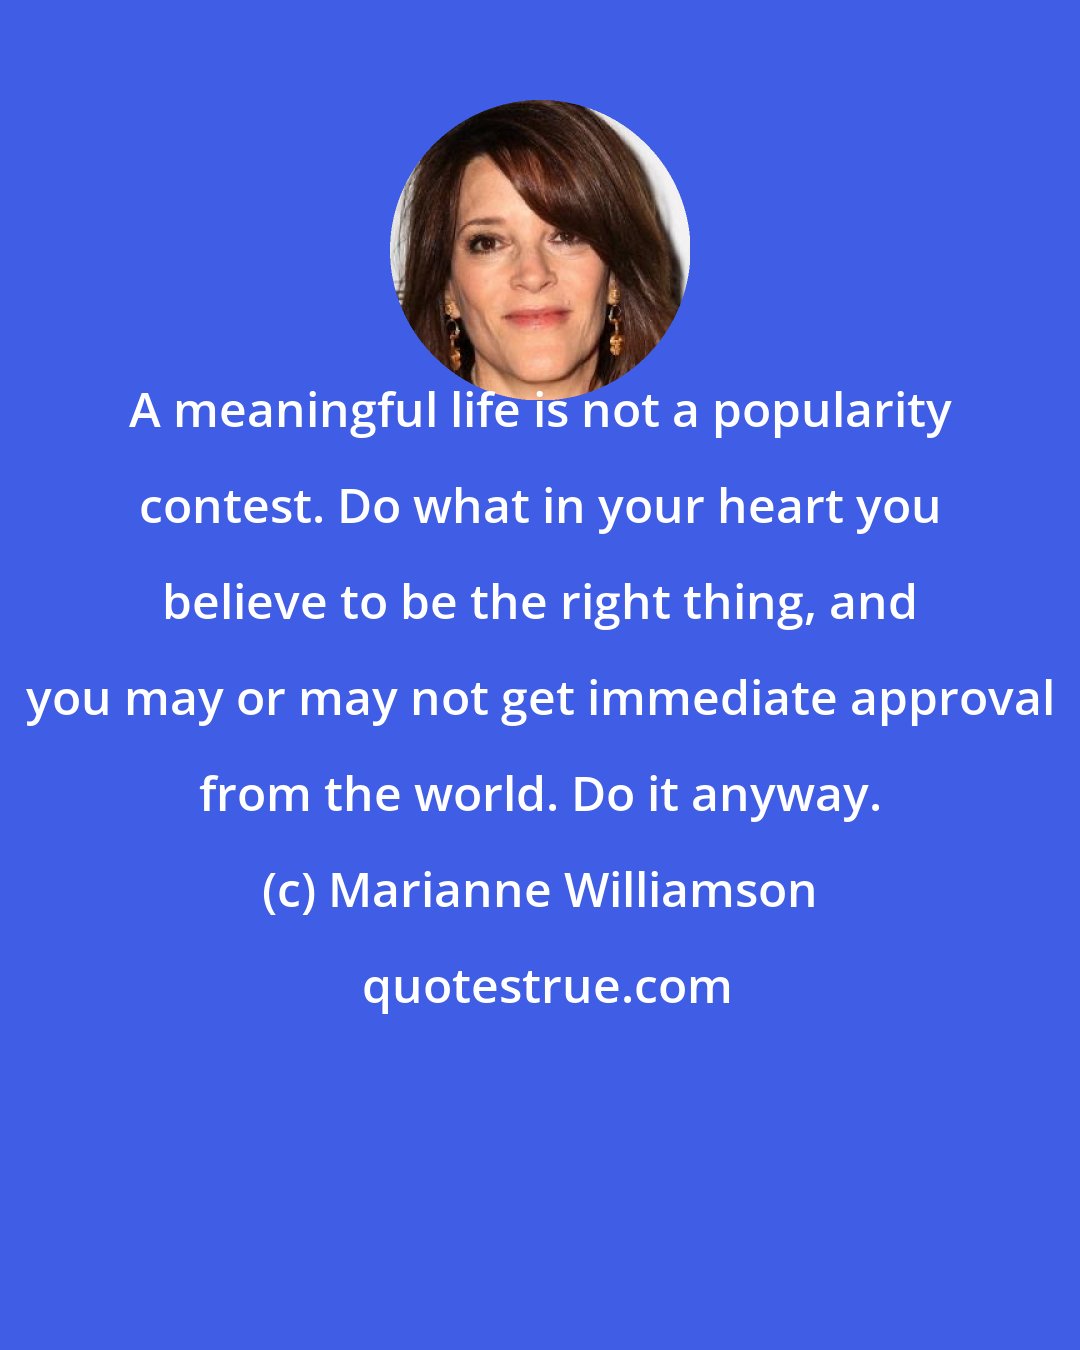 Marianne Williamson: A meaningful life is not a popularity contest. Do what in your heart you believe to be the right thing, and you may or may not get immediate approval from the world. Do it anyway.